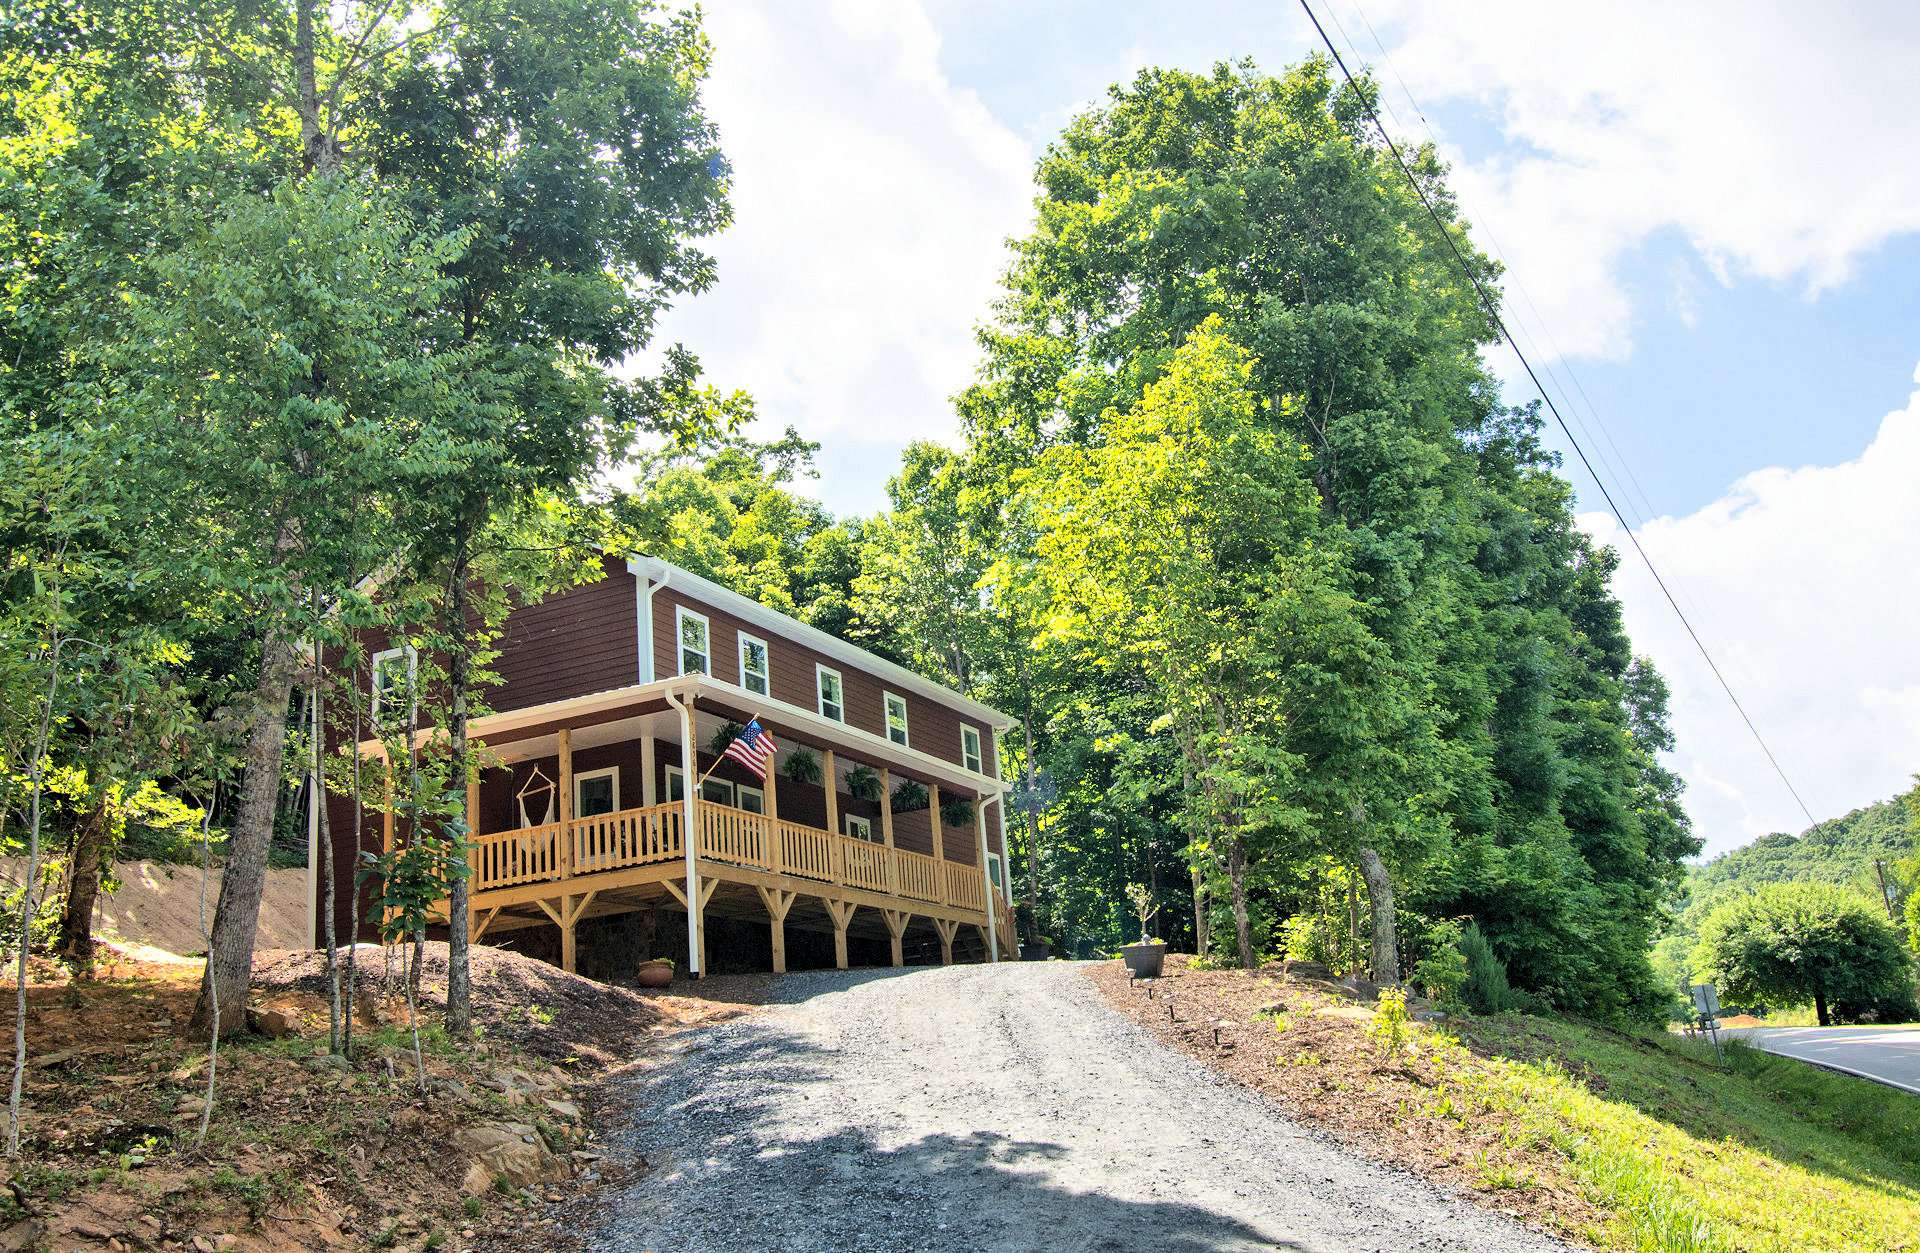 This almost new home located in the Ridge at Crossmore community of Todd area of Southern Ashe County is ideal for your NC Mountain  primary home or vacation home.  Call for additional details on listing C146.